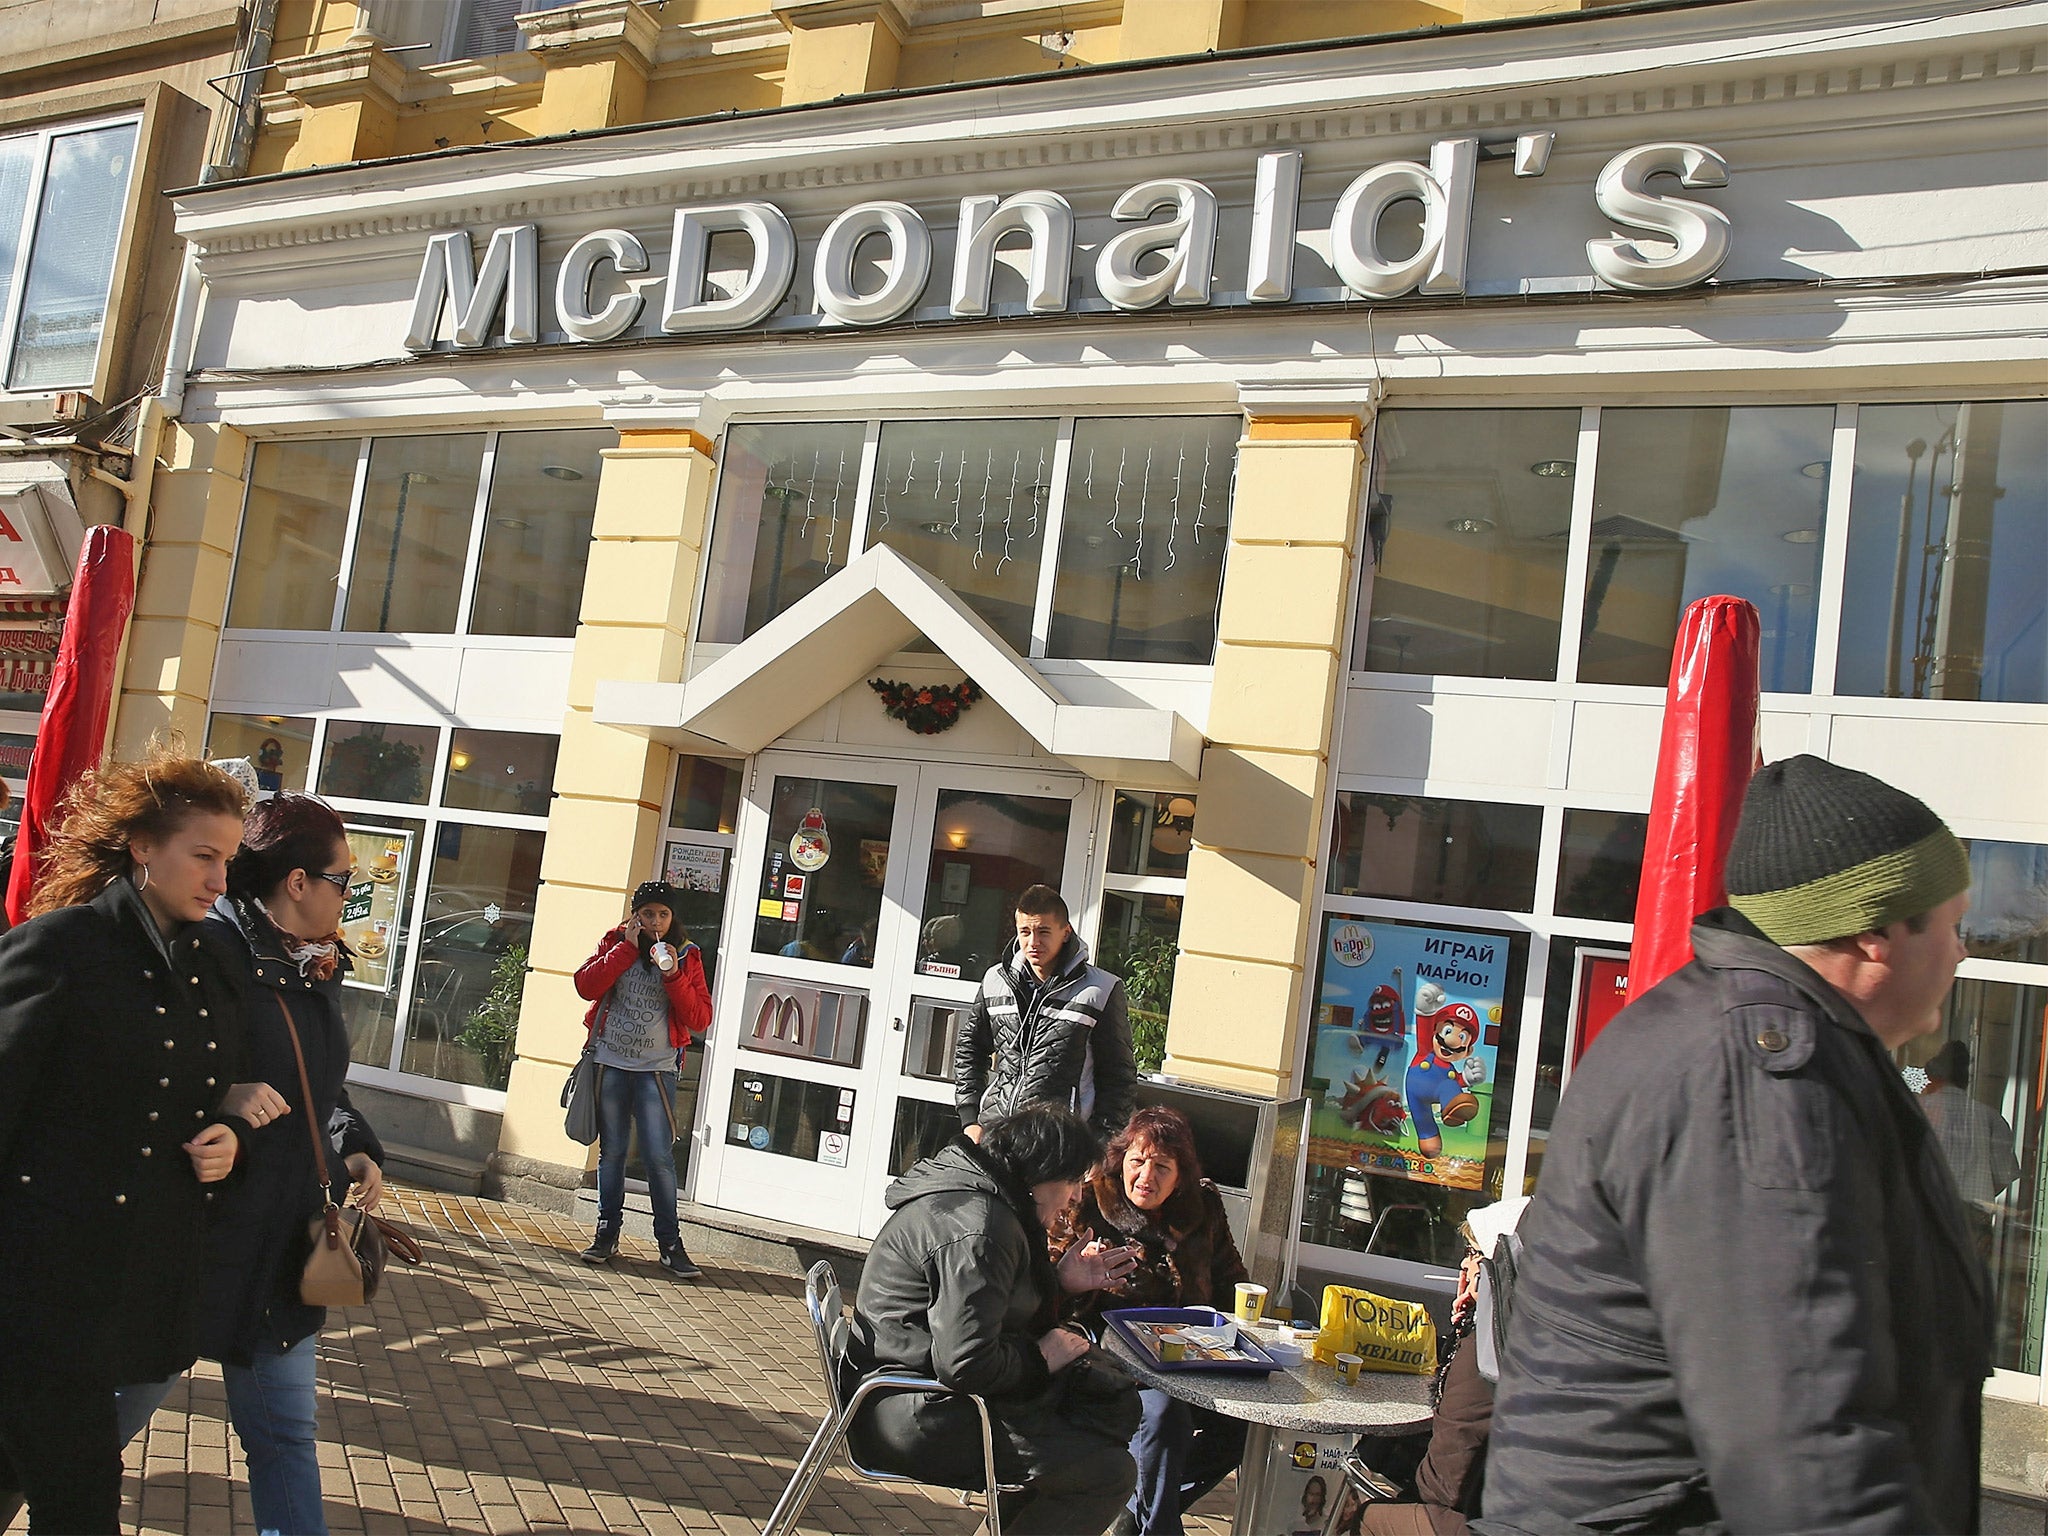 The complainants claim McDonald’s earns 66 per cent of its European revenue by collecting rent from franchisees